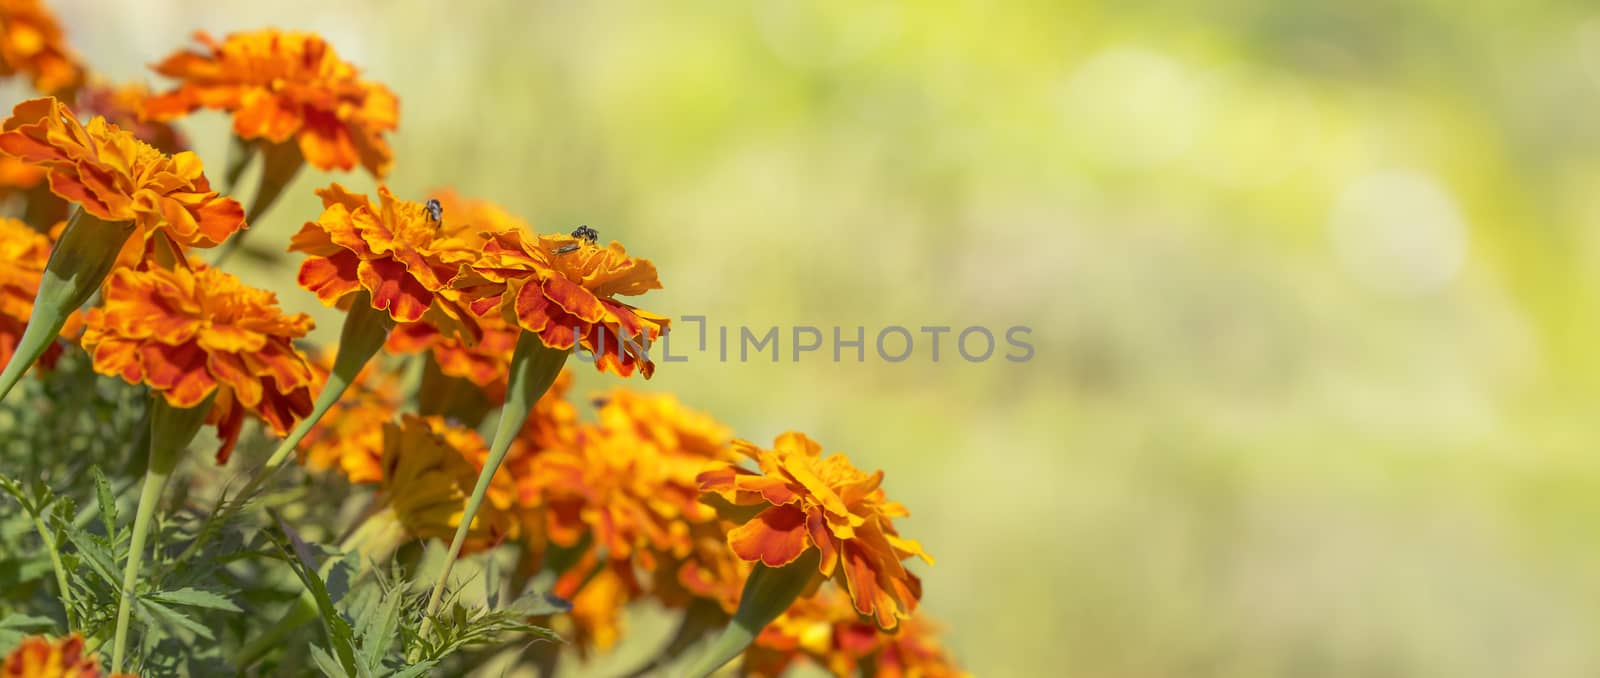 Bright golden calendula marigolds for greeting card background for condolence, funeral, love, care and remembrance  